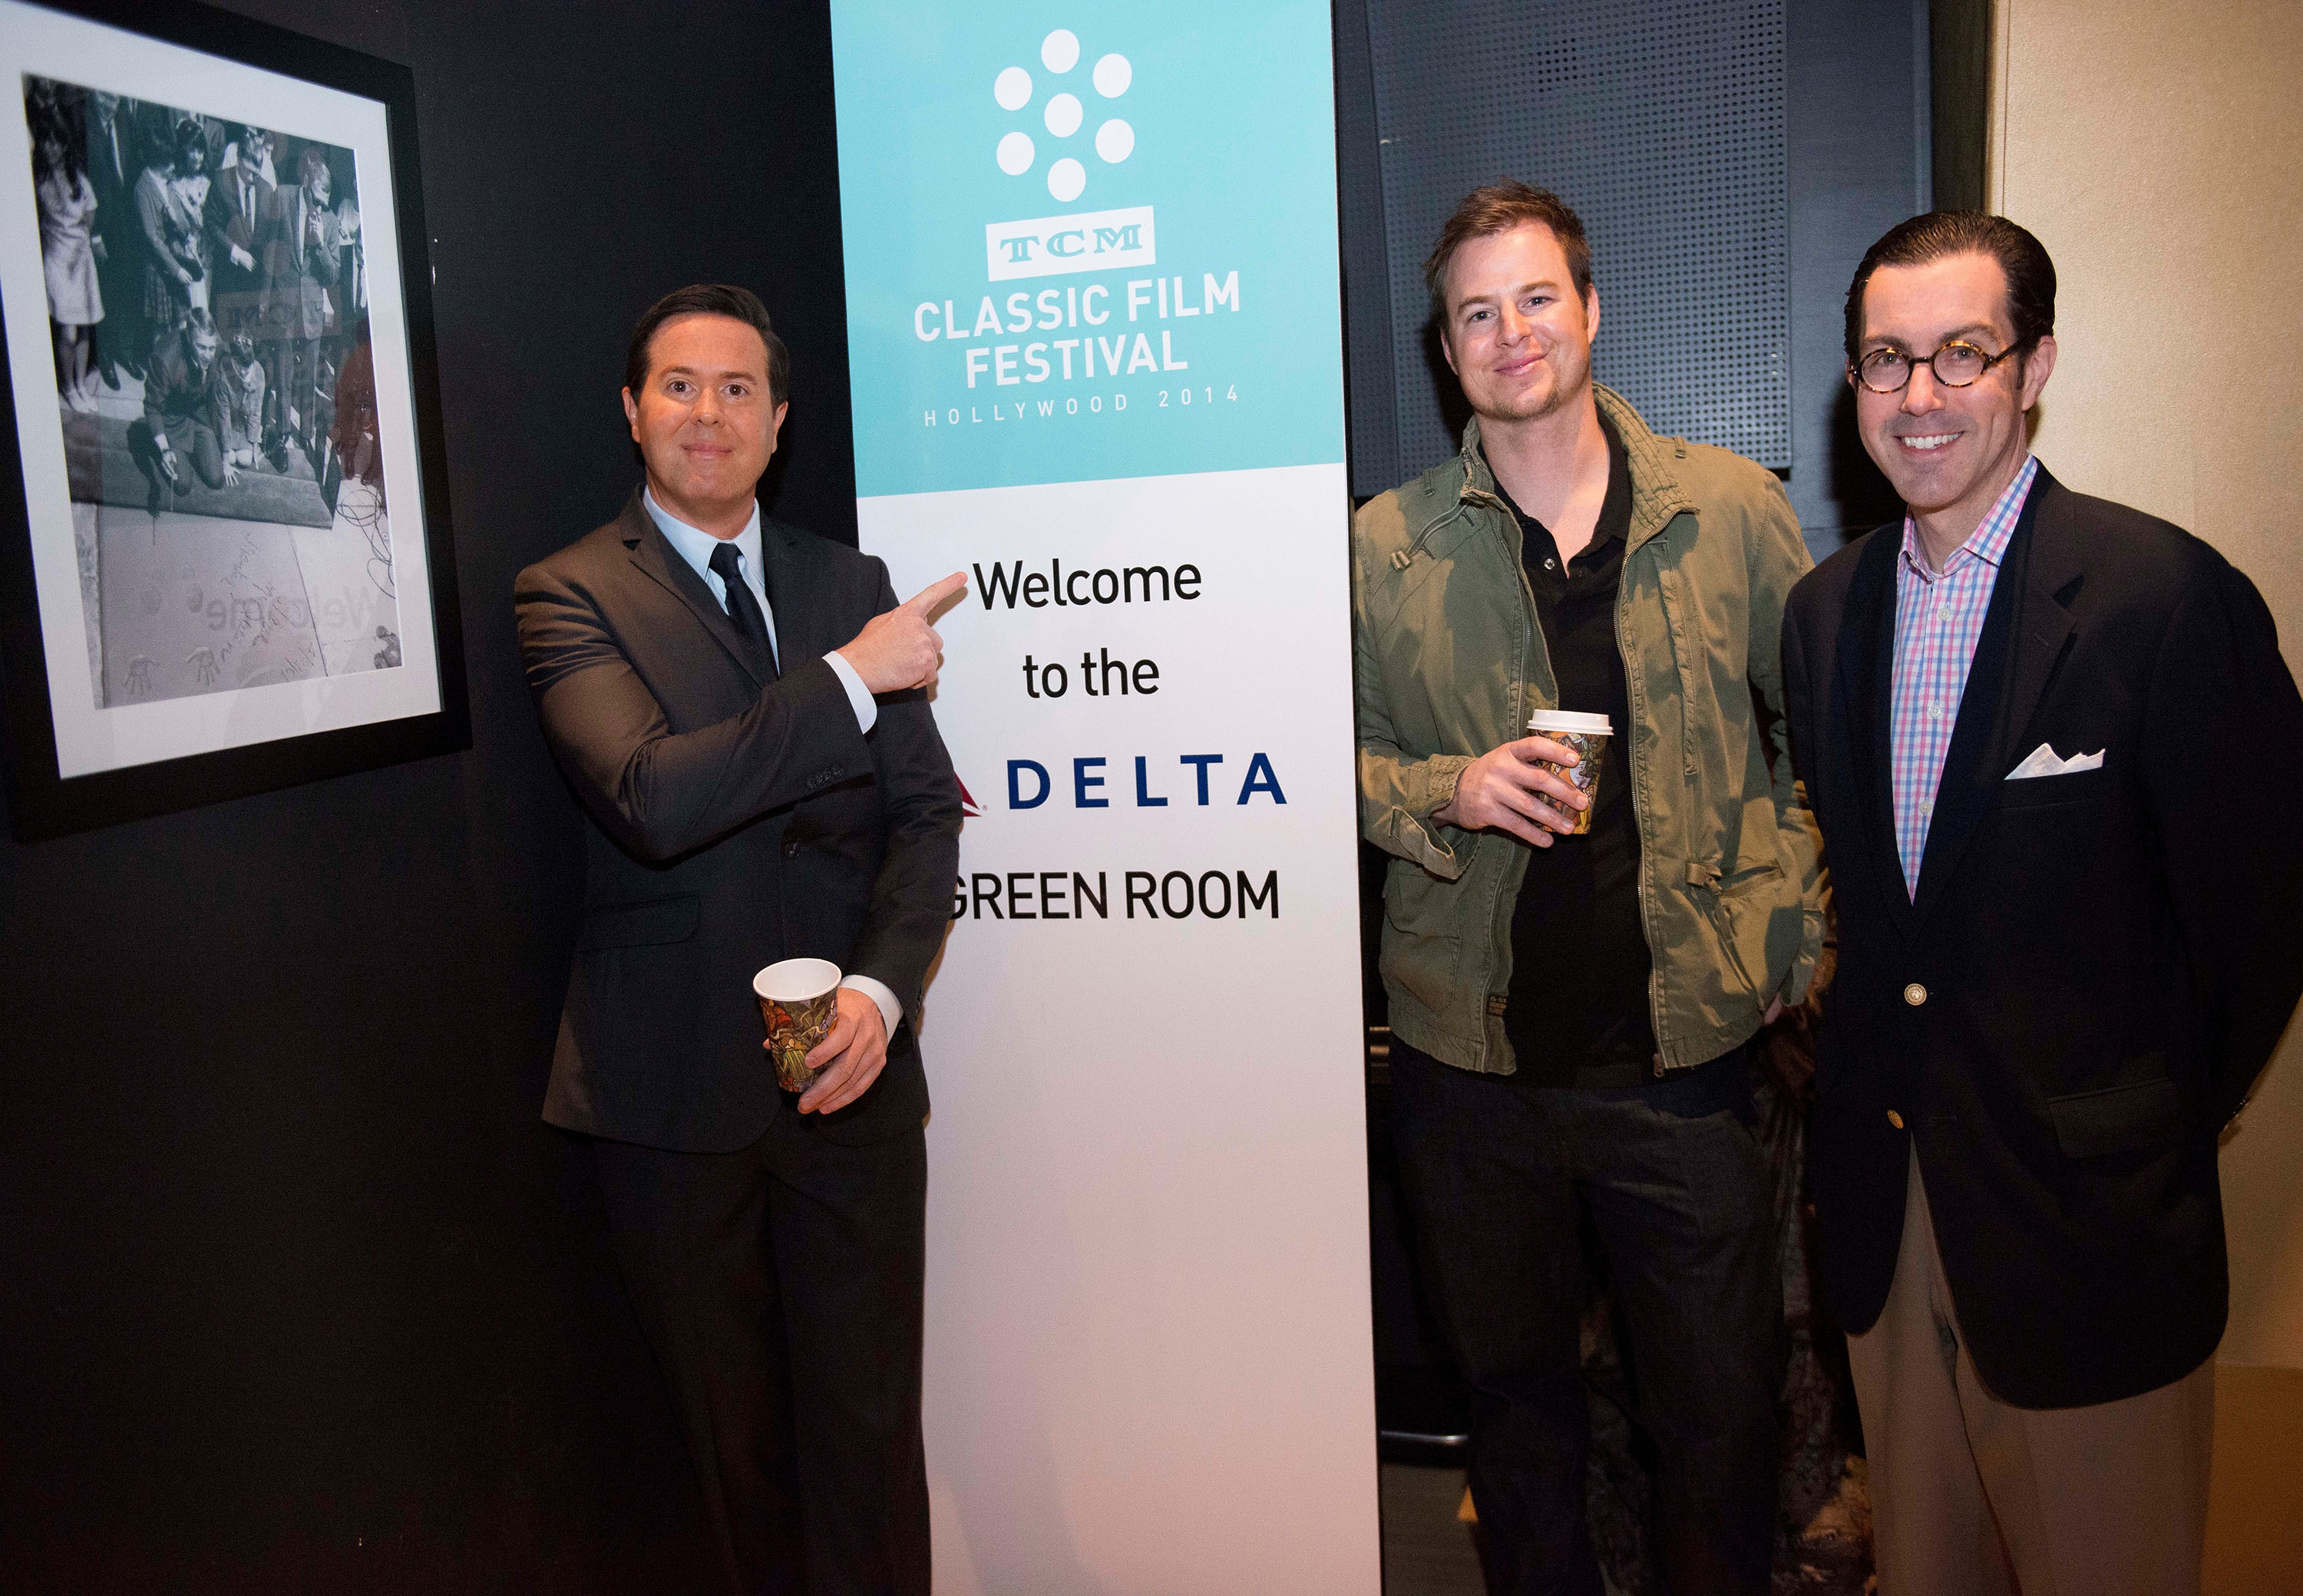 Jeffrey Vance, Matt McCarty, and Jon Bouker in the Delta Green Room at the TCM Classic Film Festival, Hollywood, CA, April 10, 2014.